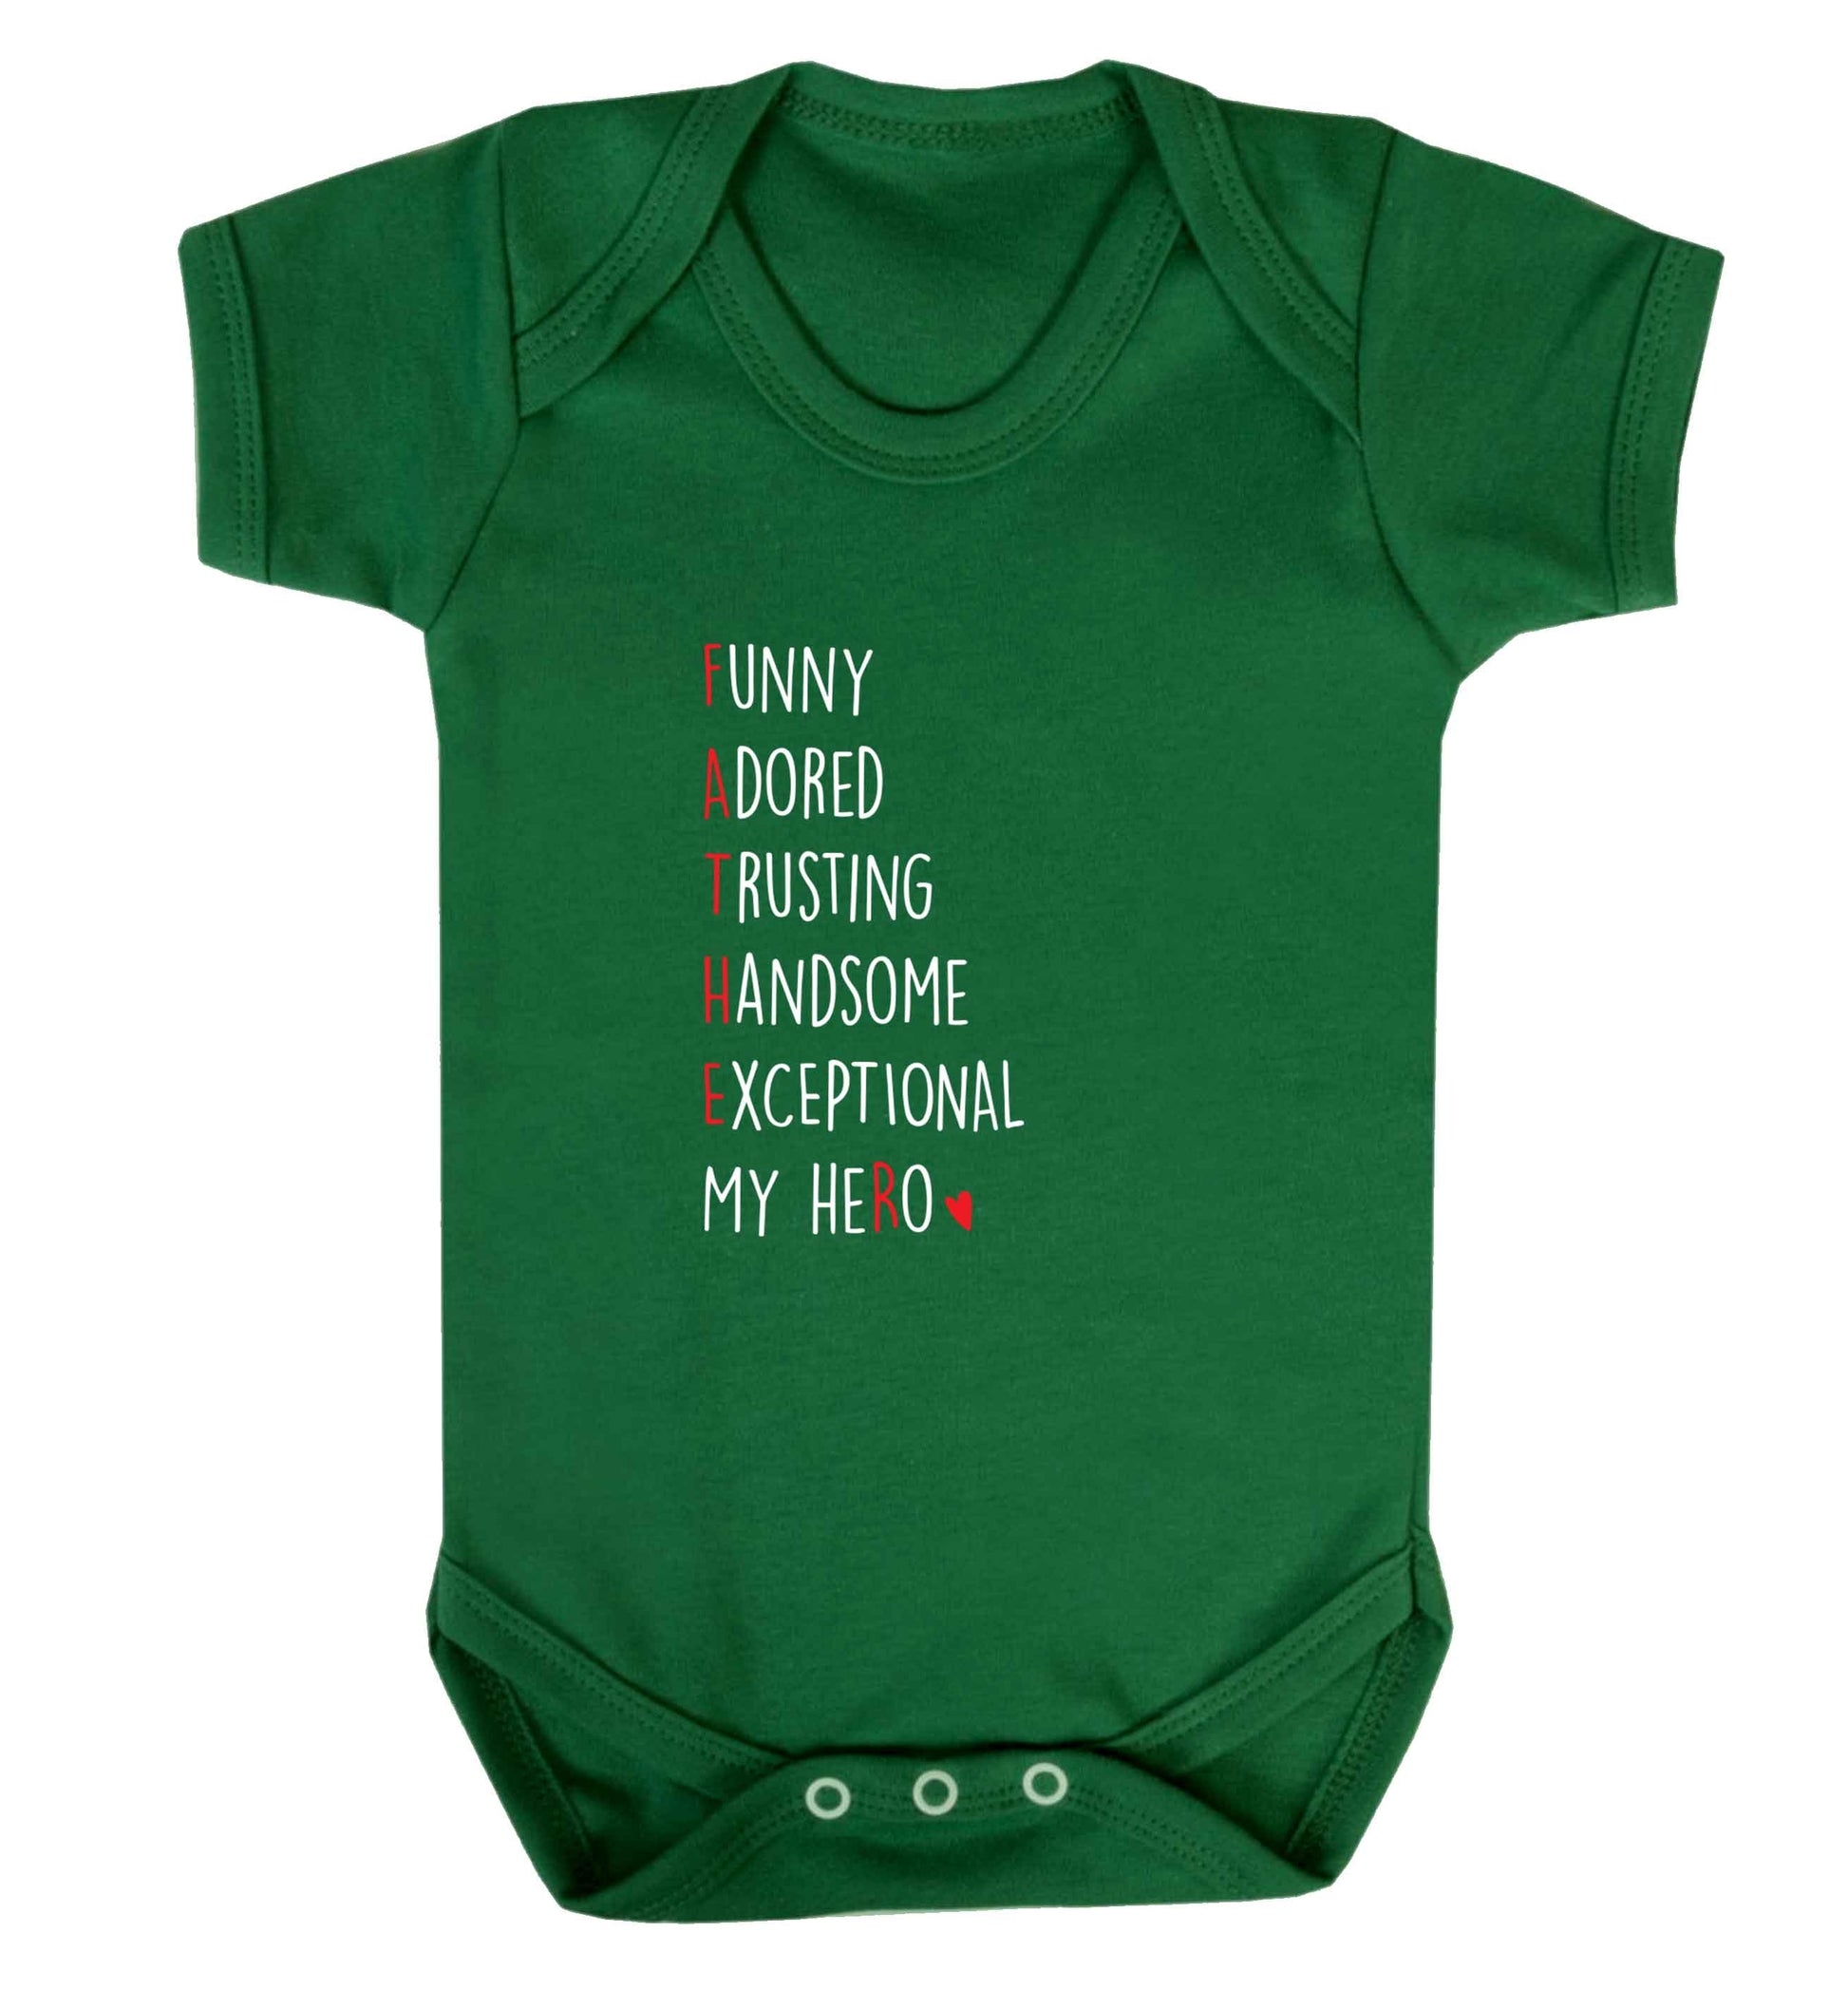 Father meaning hero acrostic poem baby vest green 18-24 months